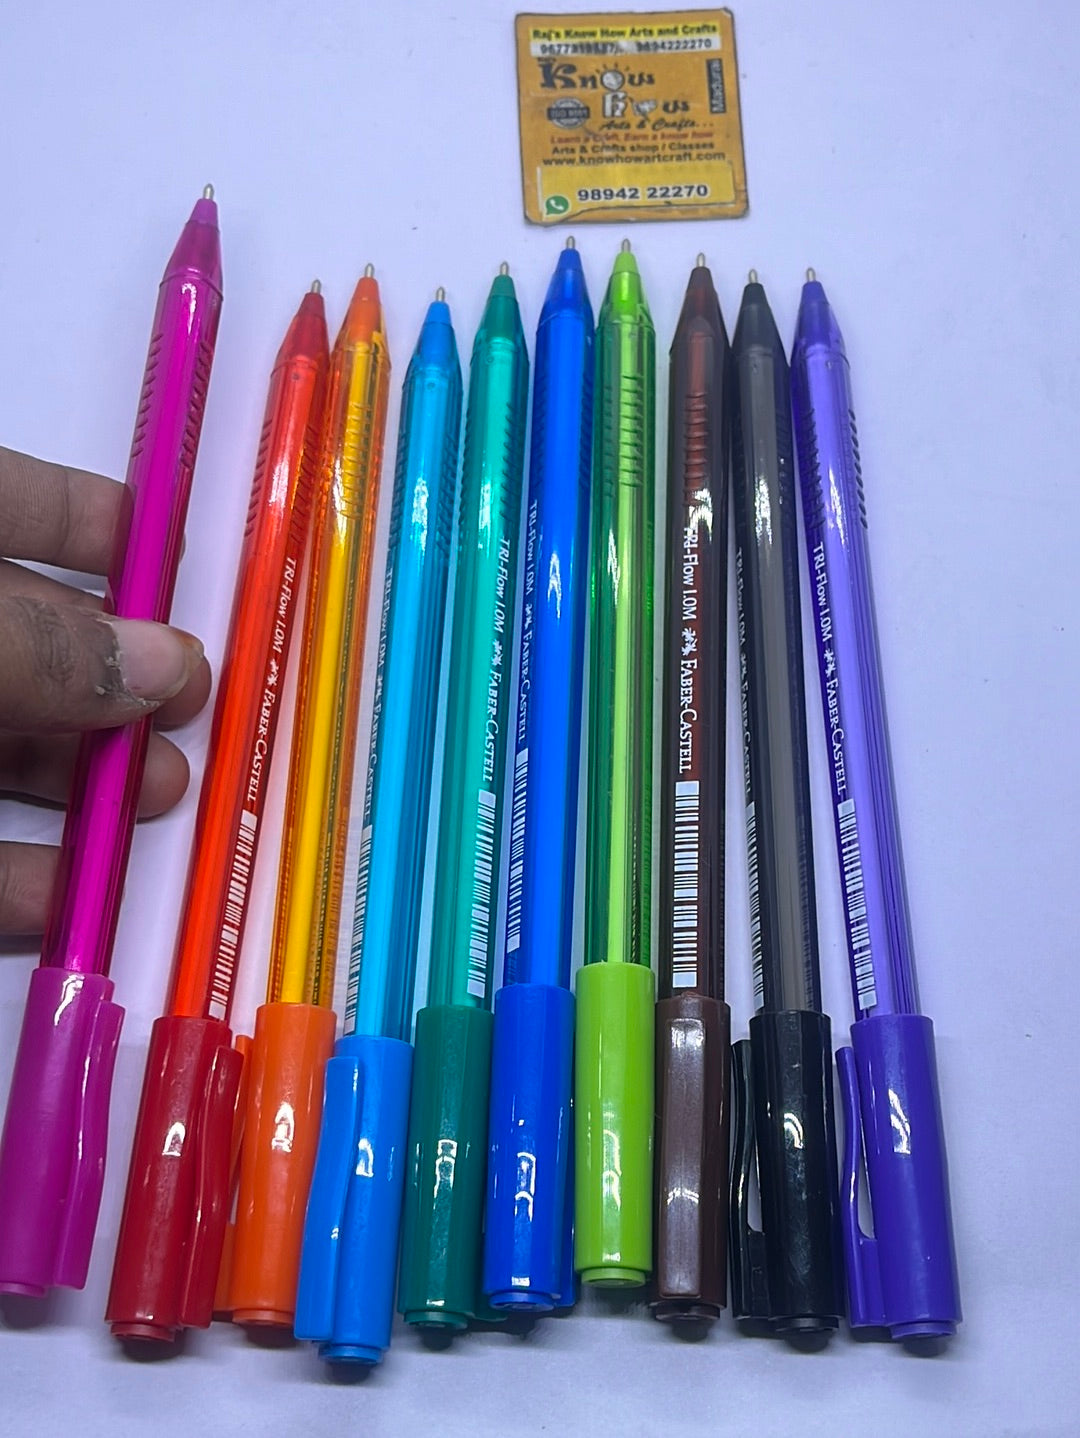 Faber castell bright colours for Ballpoint pens